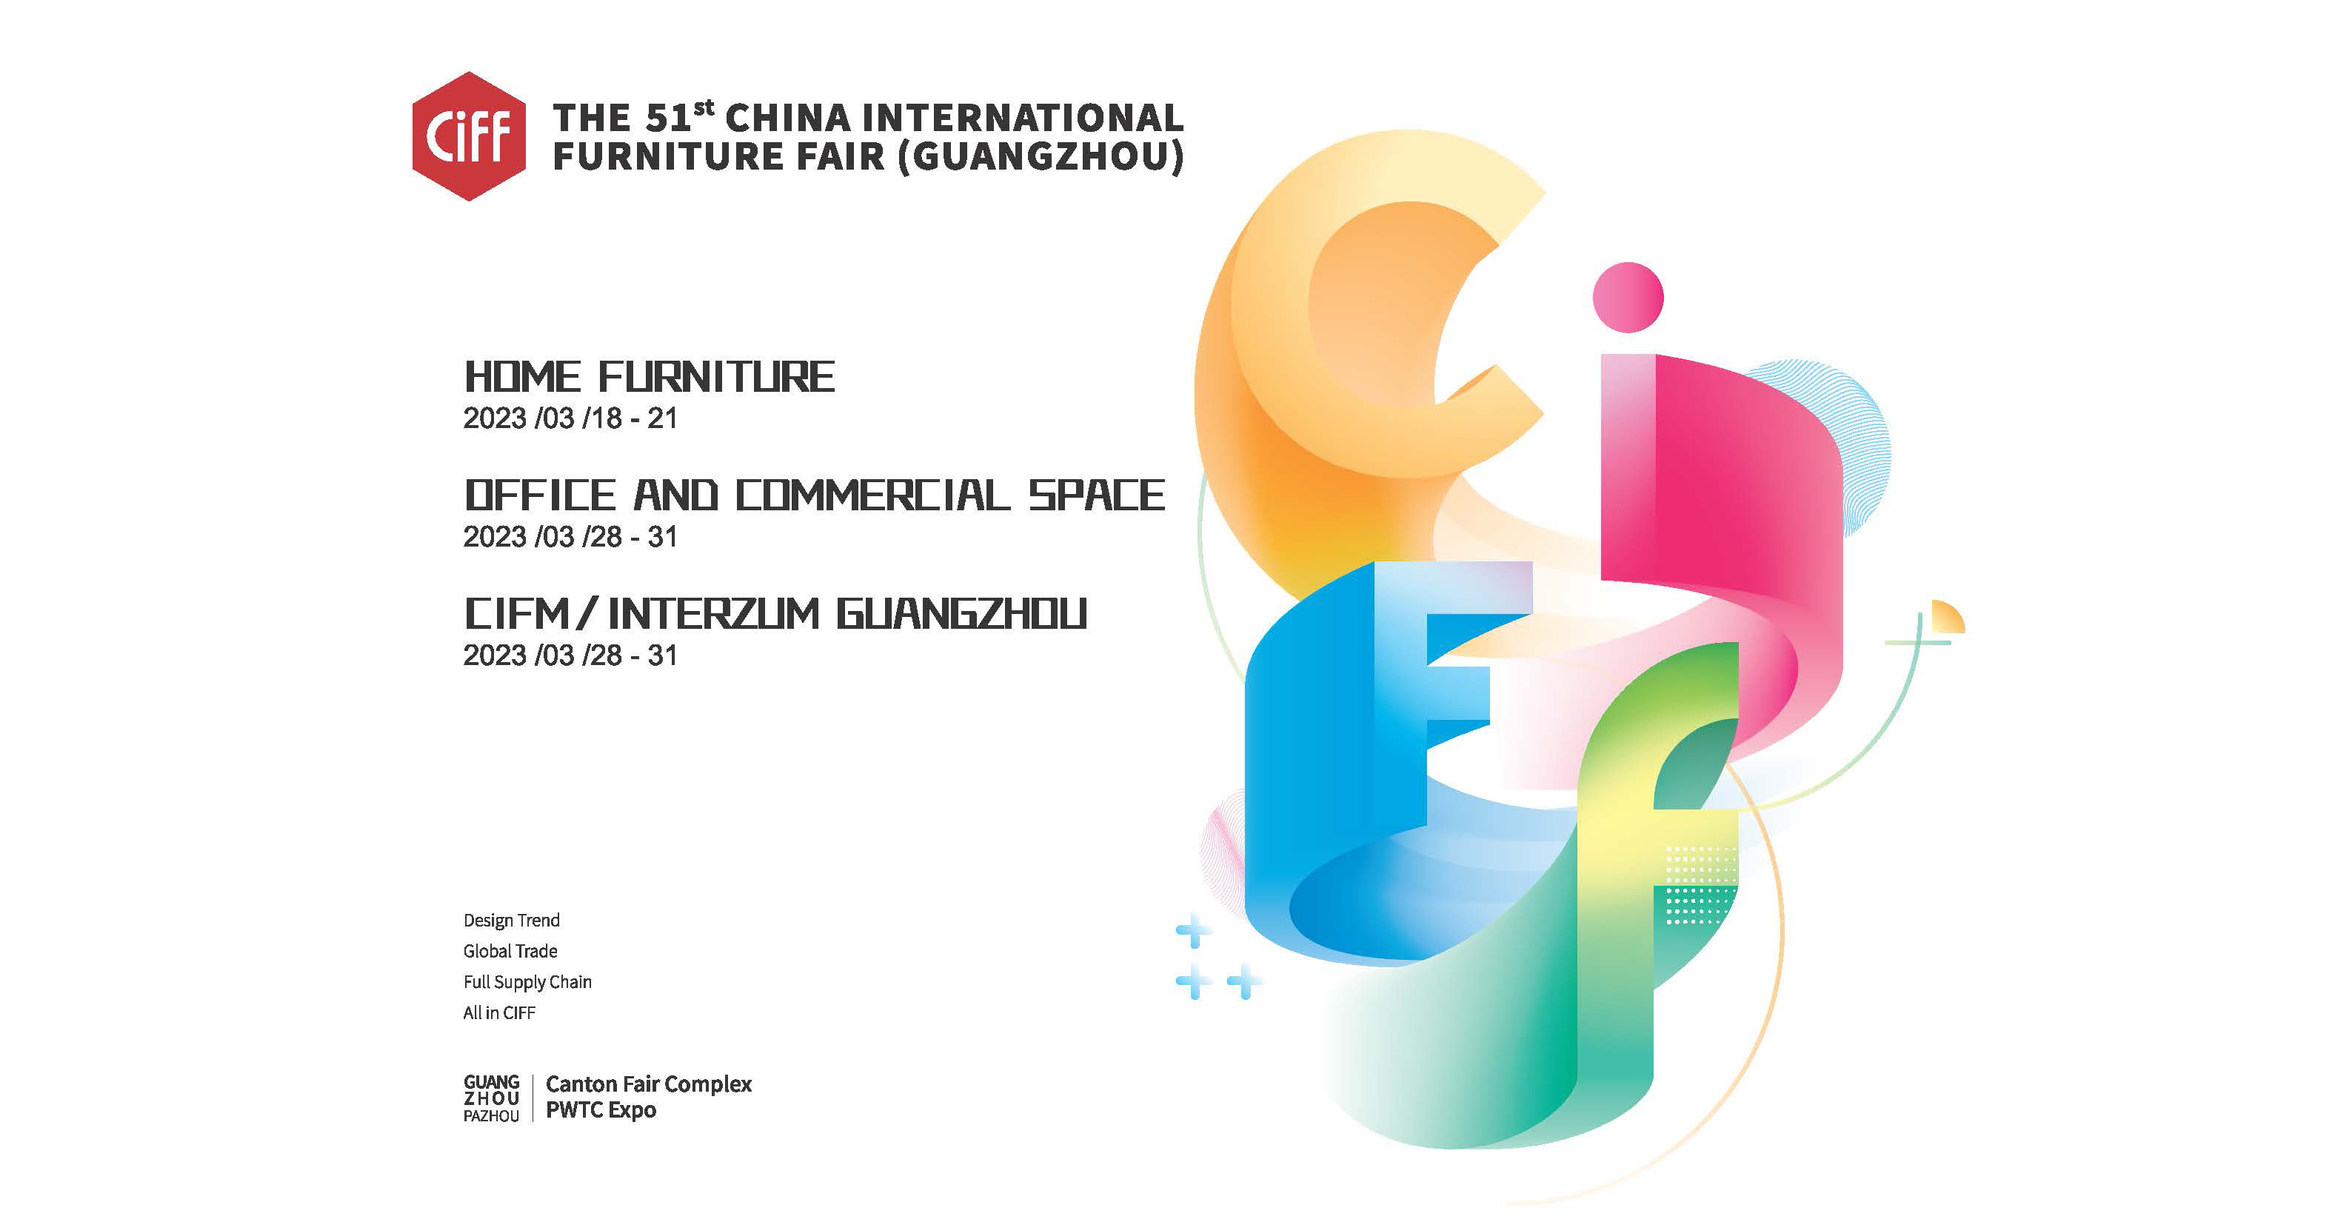 The 49th CIFF Guangzhou Presents the Entire Furniture Supply Chain to 50 Million Visitors Online and Offline